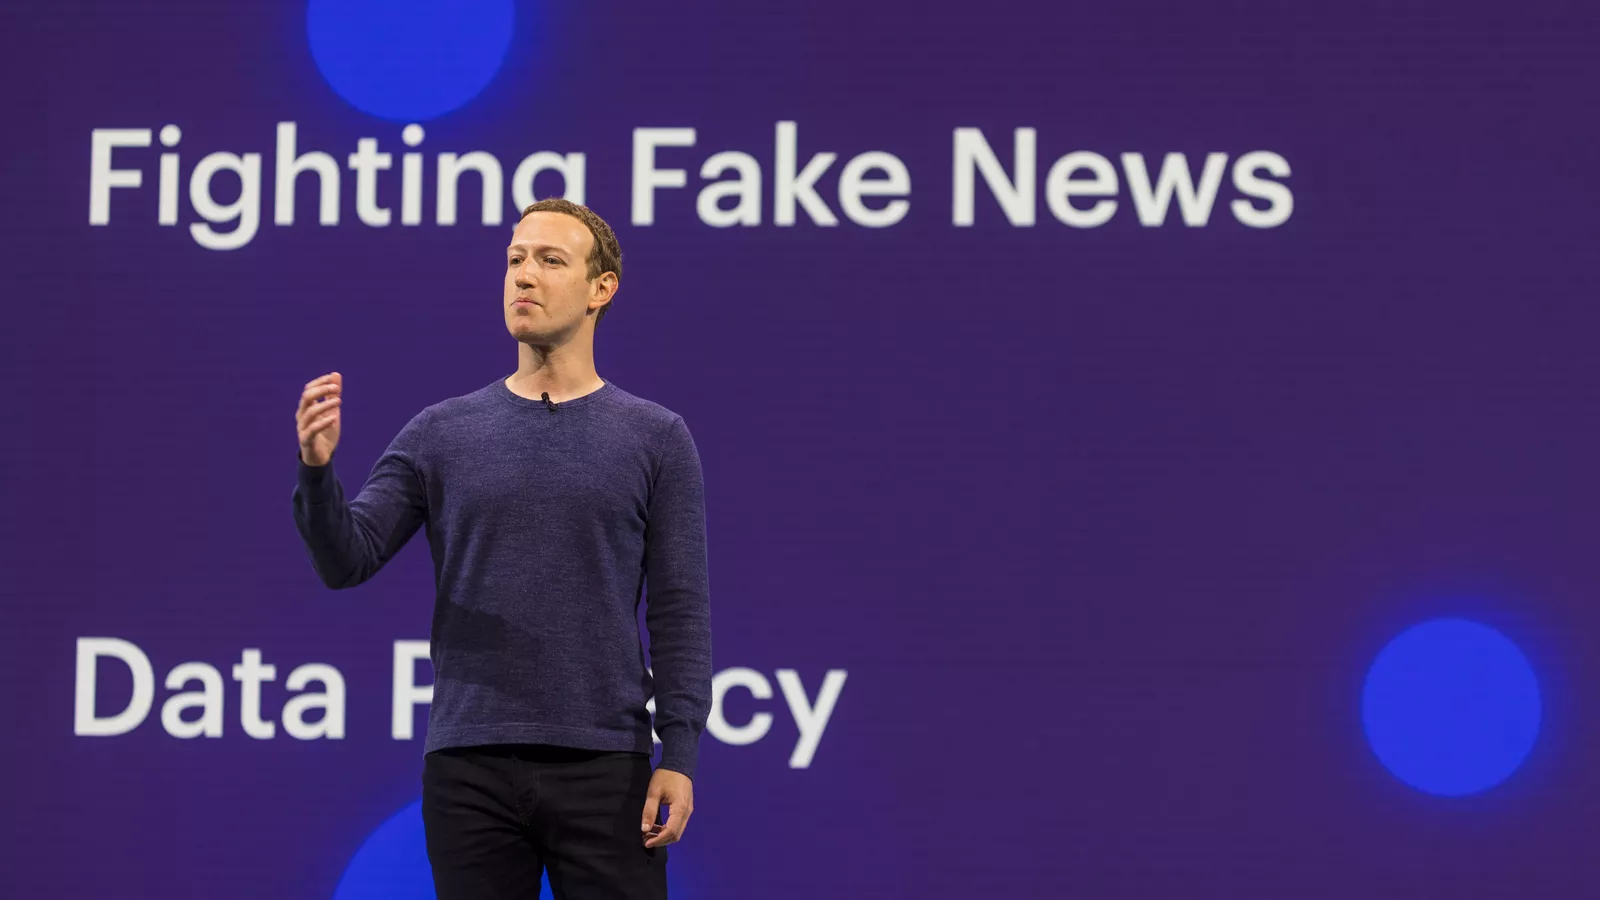 Facebook May Add A Separate News Tab To Promote High Quality, Trusted Content